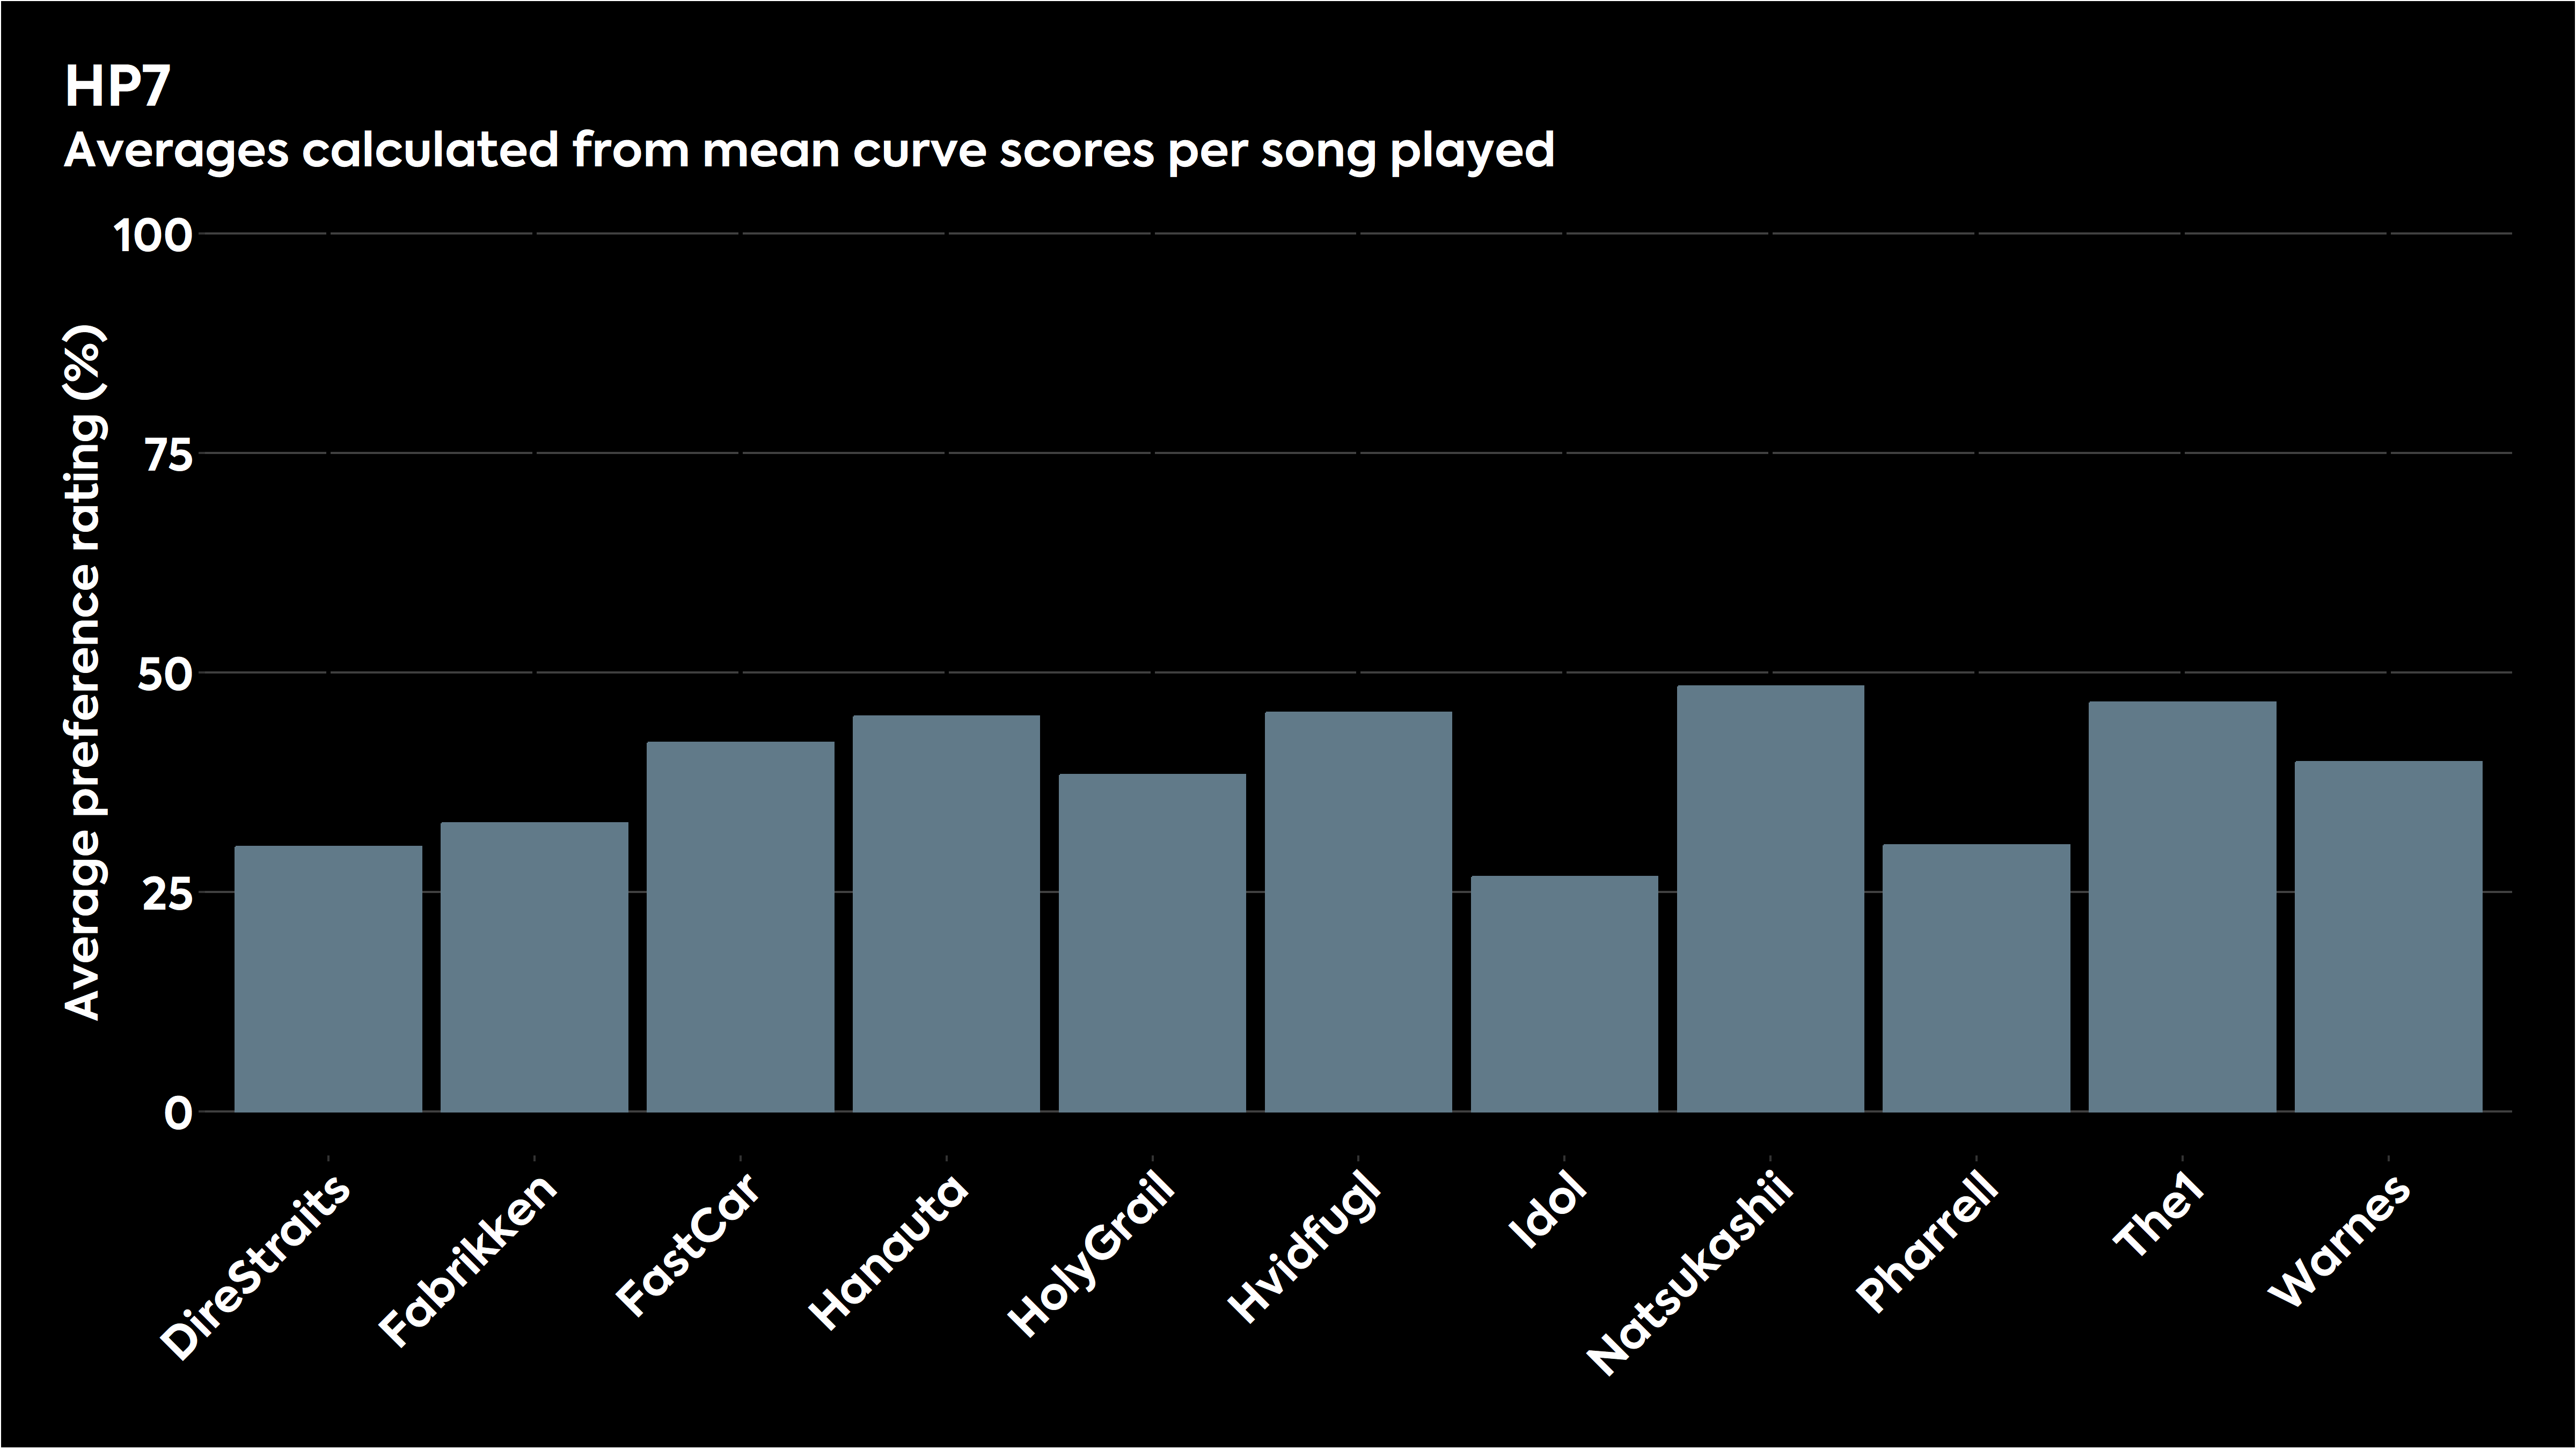 Bar chart showing how the various stimuli were judged for HP7 in listening tests.